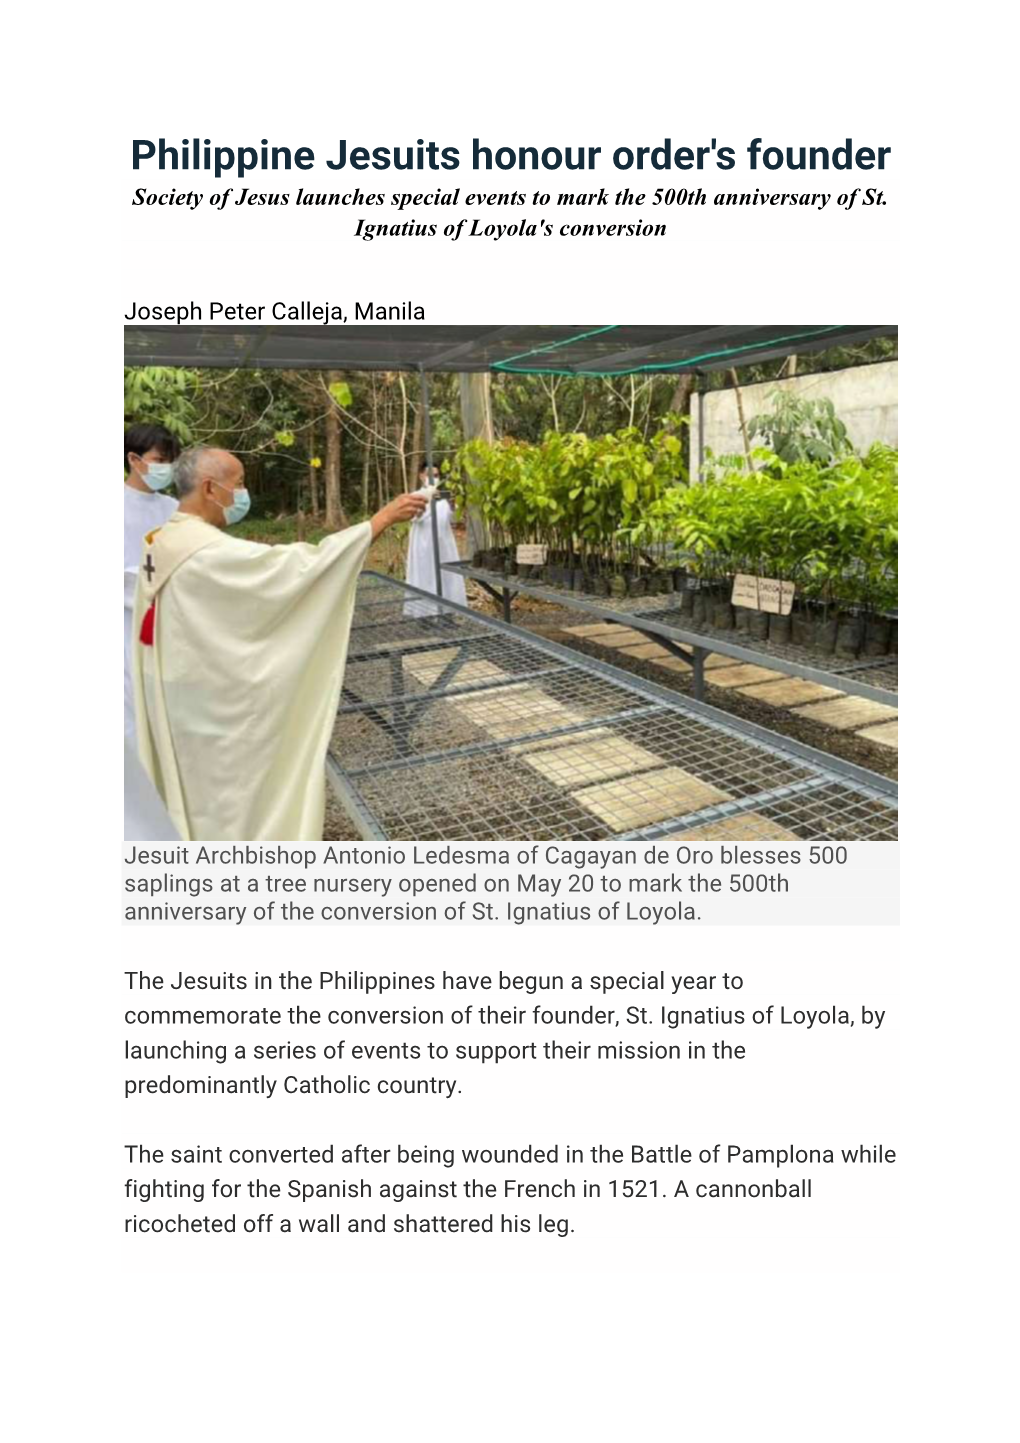 Philippine Jesuits Honour Order's Founder Society of Jesus Launches Special Events to Mark the 500Th Anniversary of St